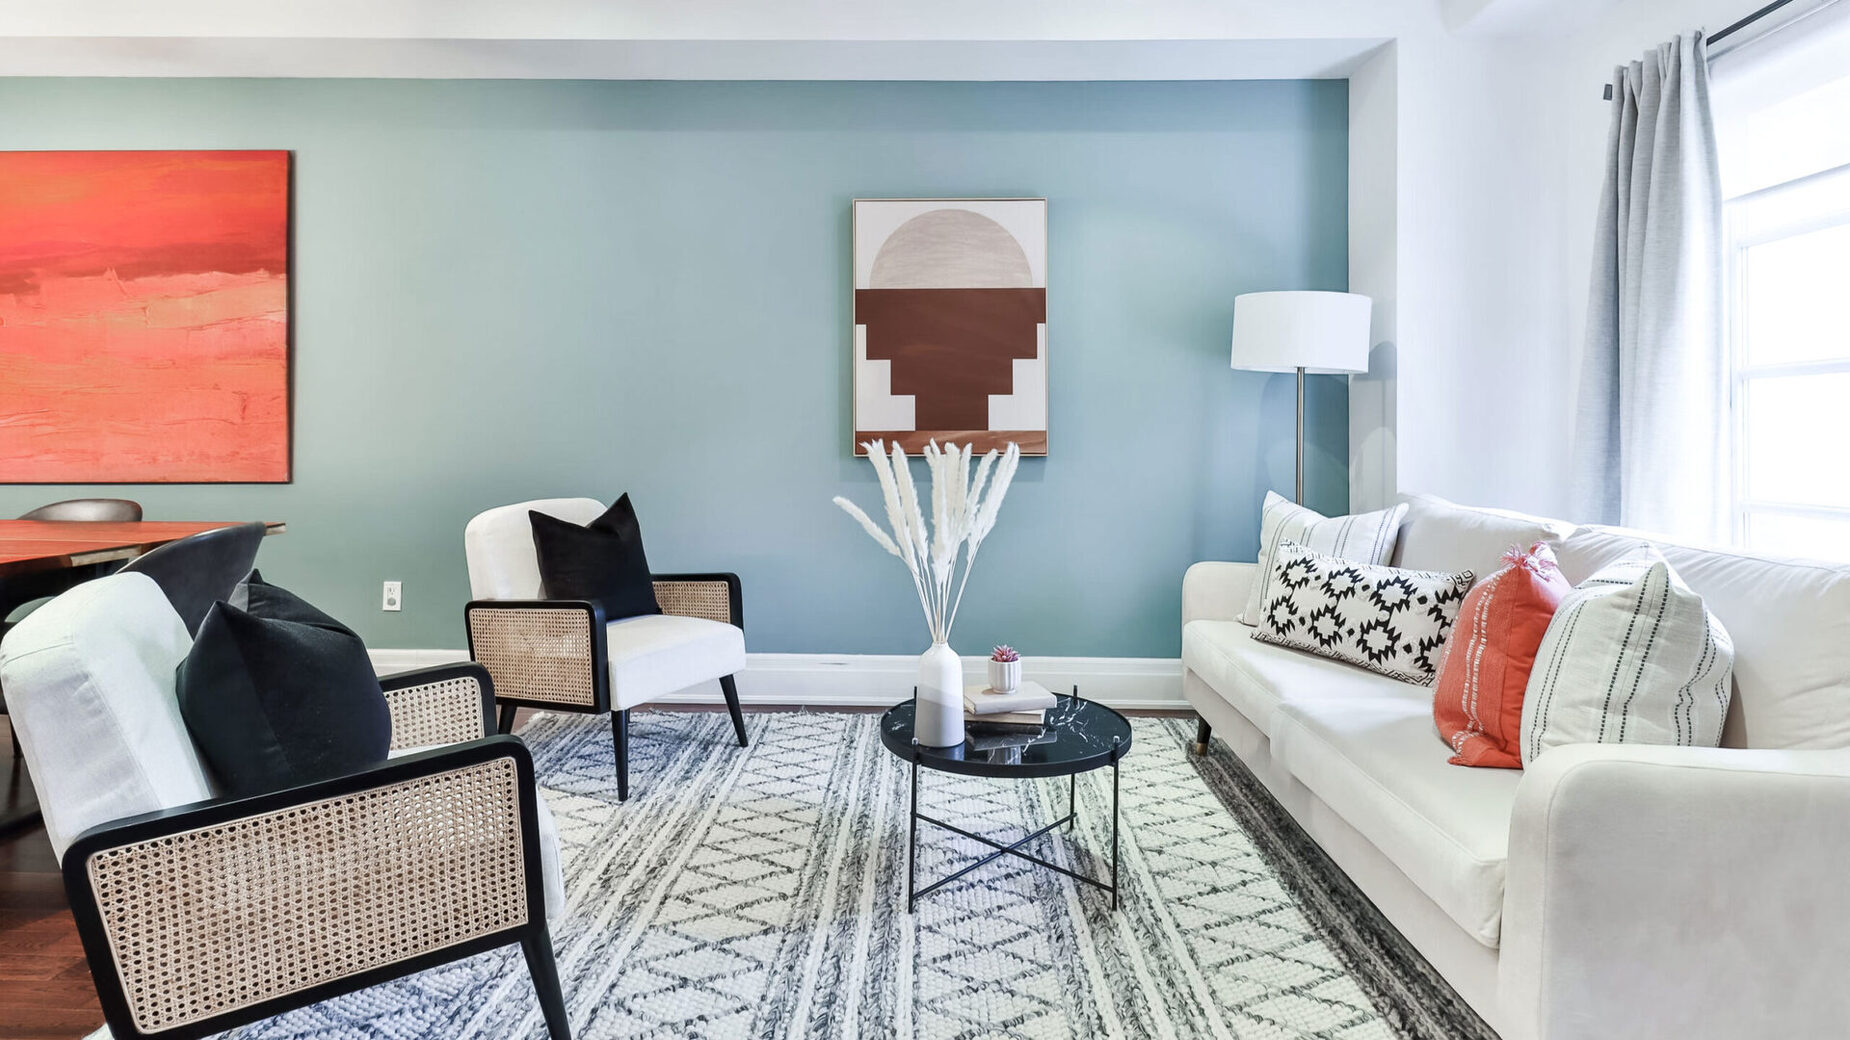 What Are The Best Colors For South-facing Rooms? These Are The Designers’ Favorite Shades